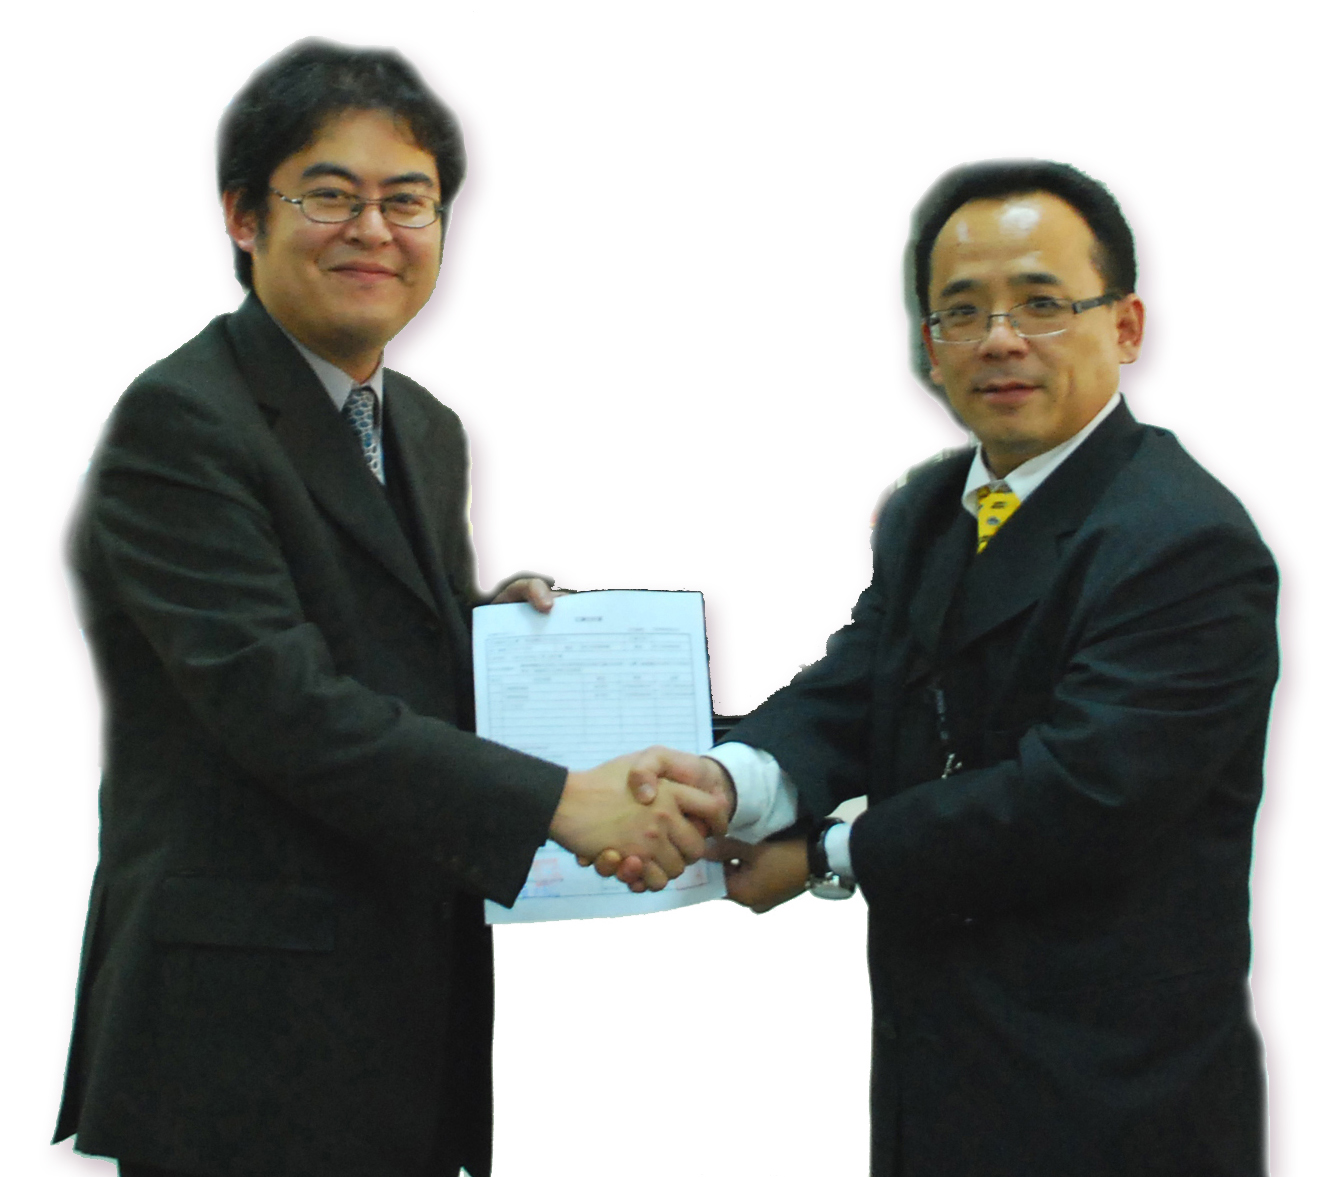 Huang (left) shakes hands with Mazaki to seal the strategic partnership.